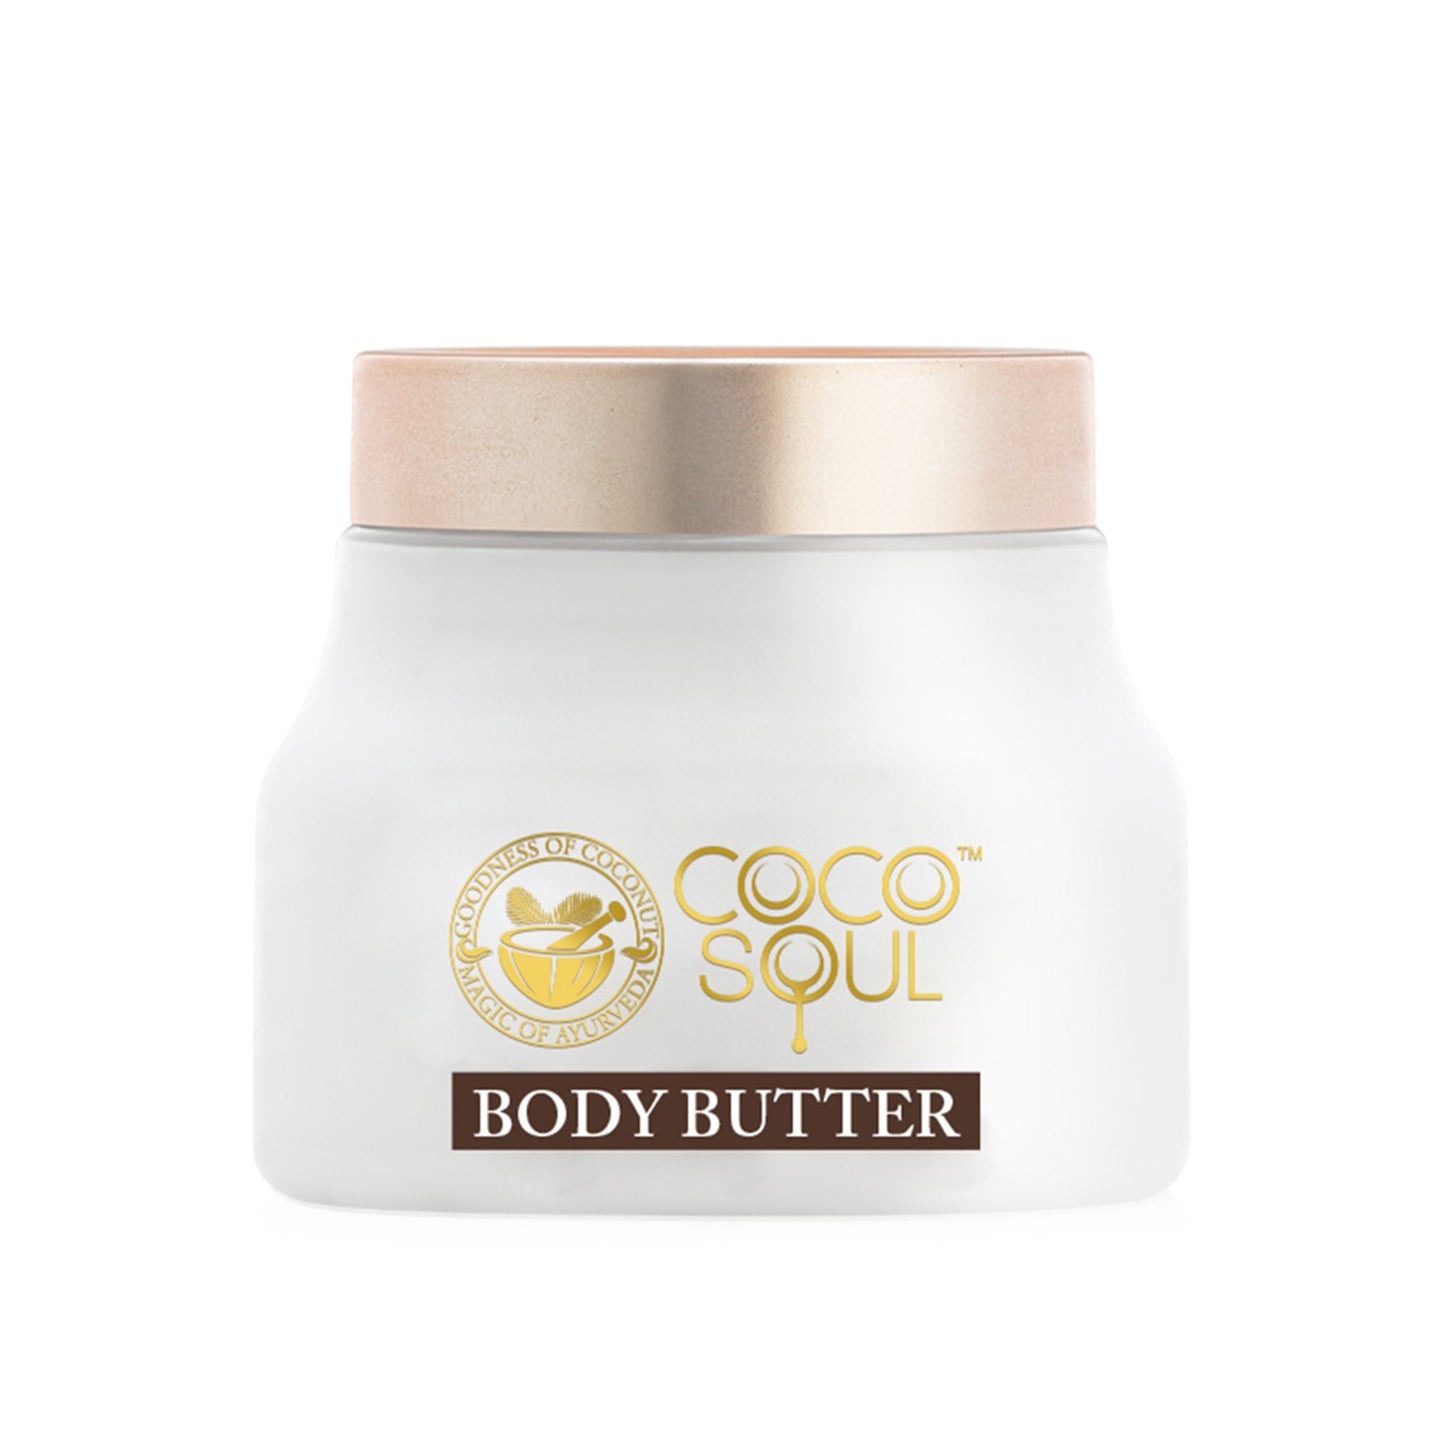 AFF Body Butter  From the makers of Parachute Advansed  140g